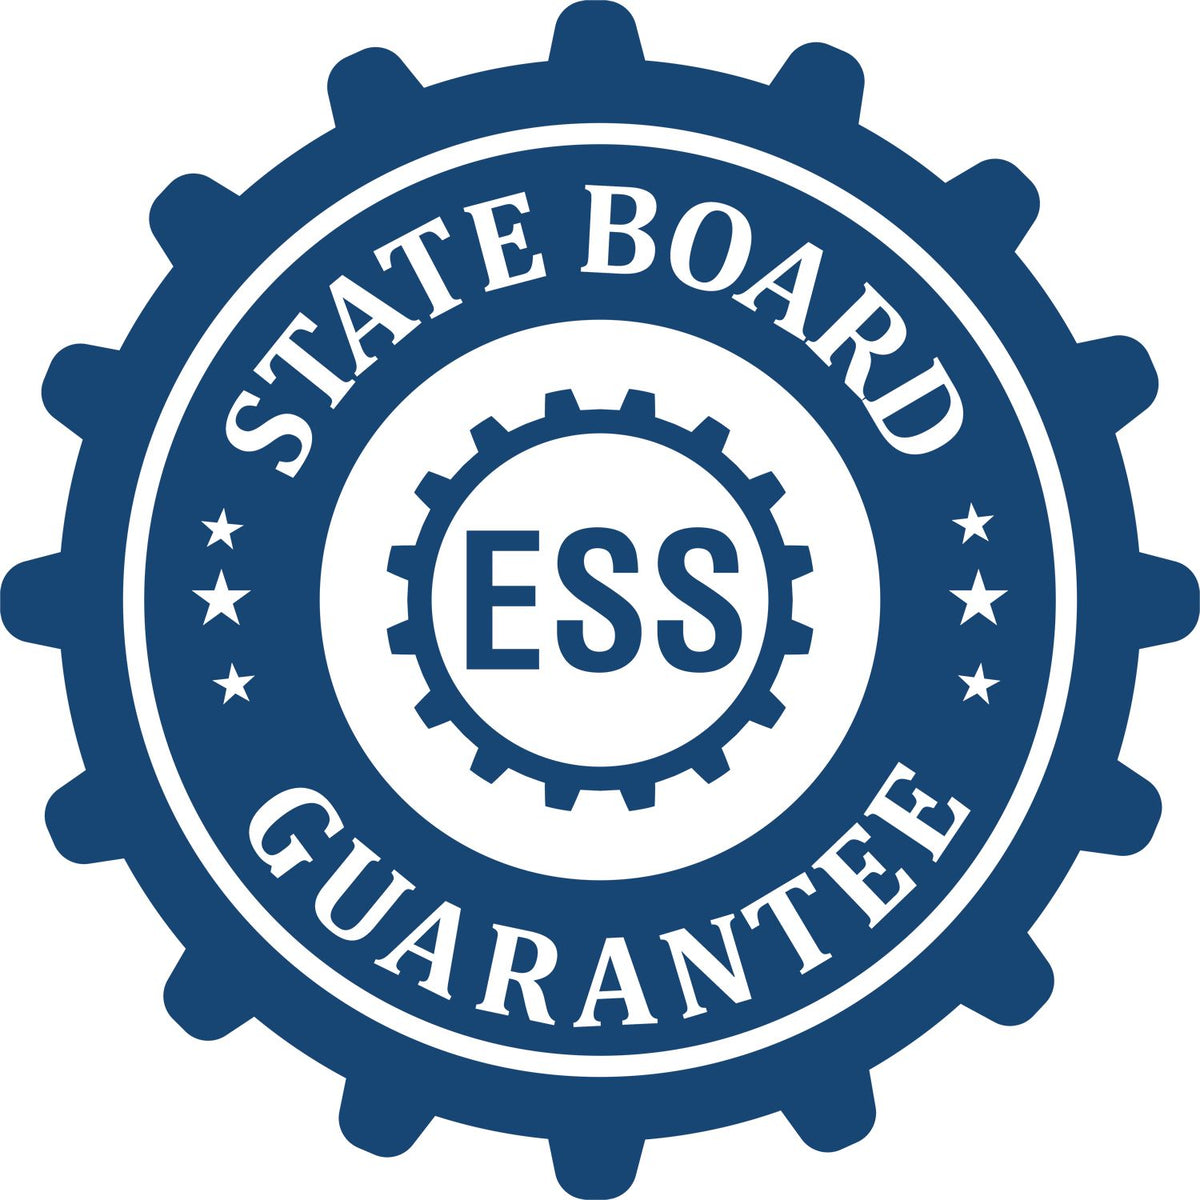 An emblem in a gear shape illustrating a state board guarantee for the State of Hawaii Extended Long Reach Geologist Seal